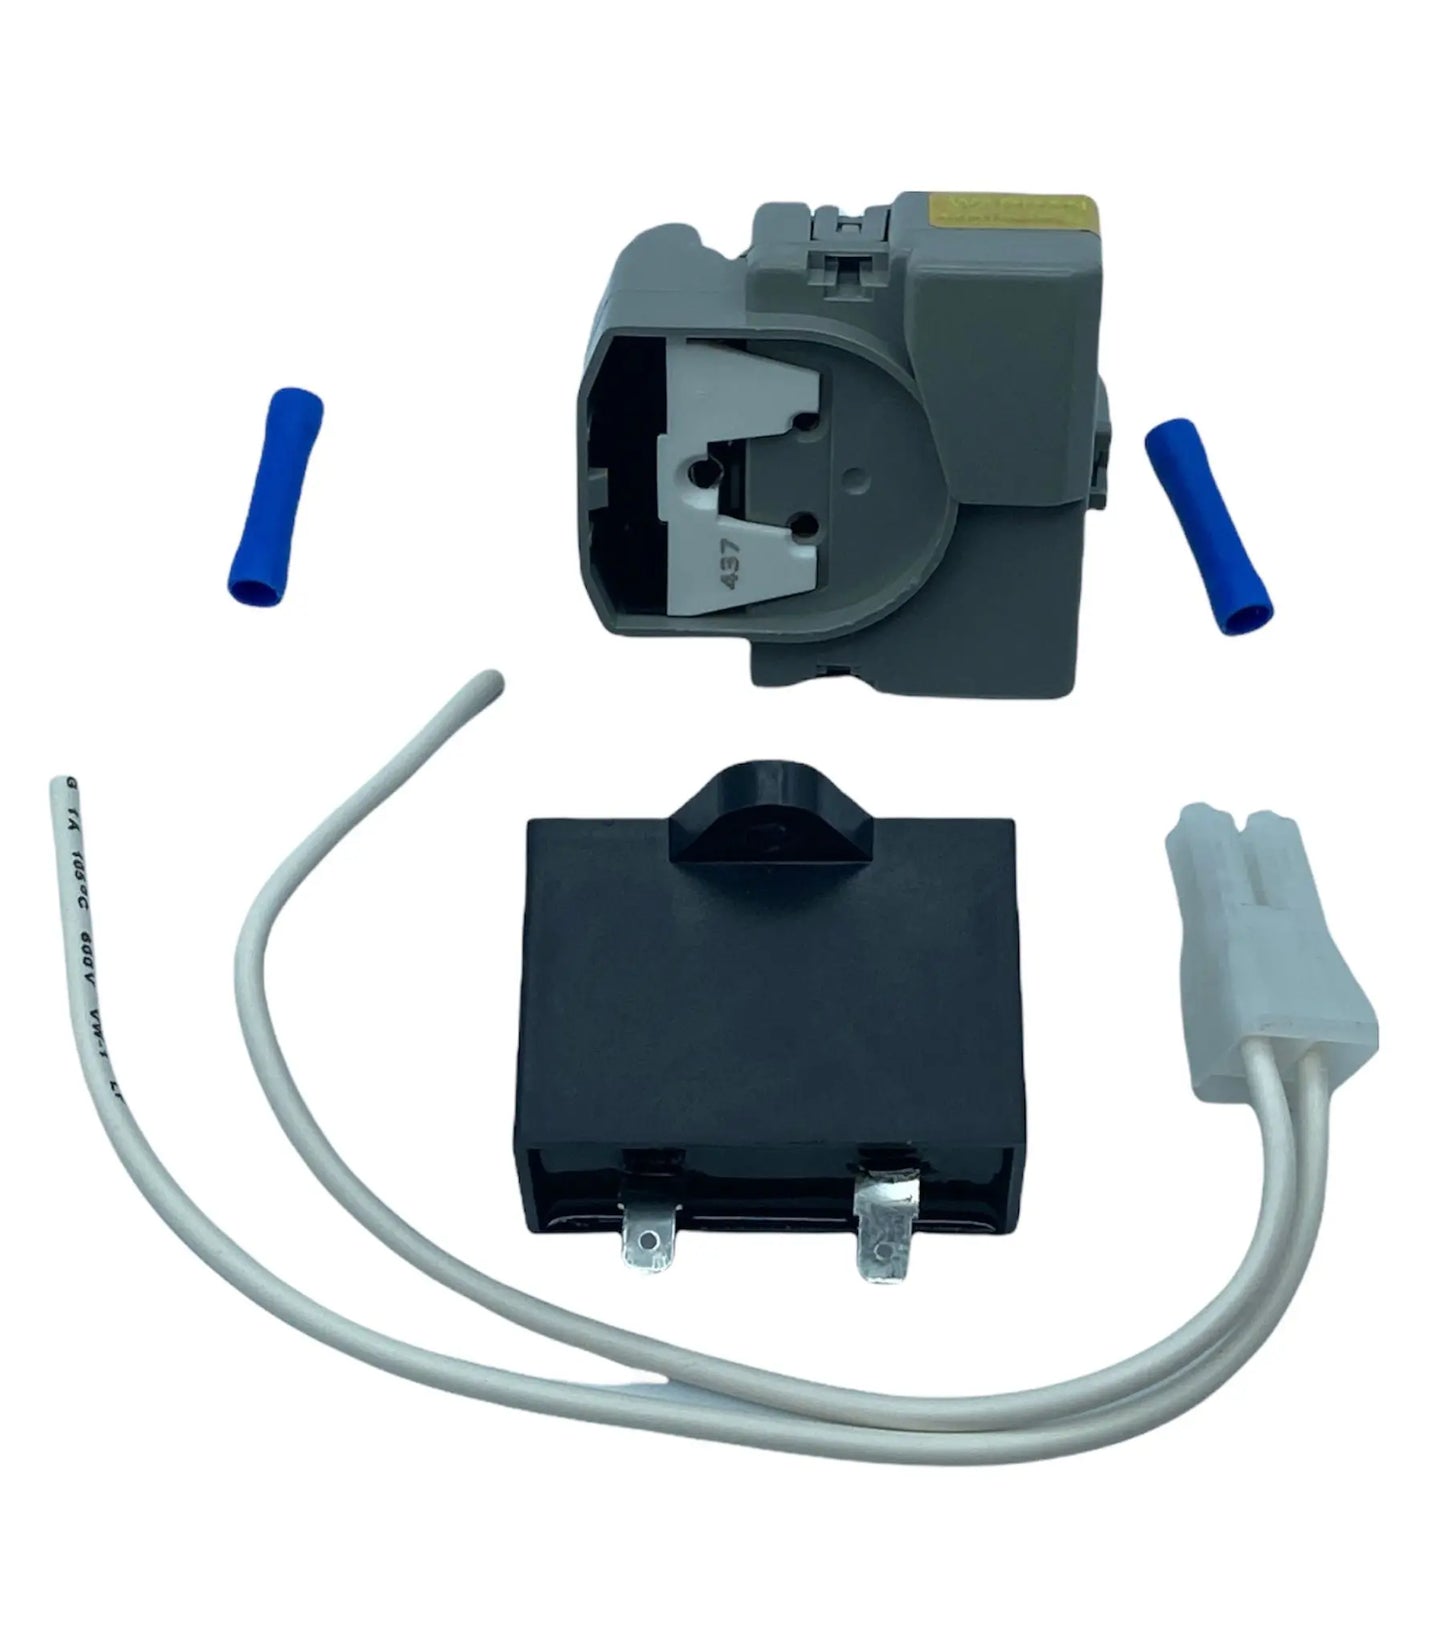 G.E Refrigerator Start Device Kit - WR08X21100 or WR01L09340,  REPLACES: AP5986440 PS11721884 EAP11721884 PD00036464 INVERTEC